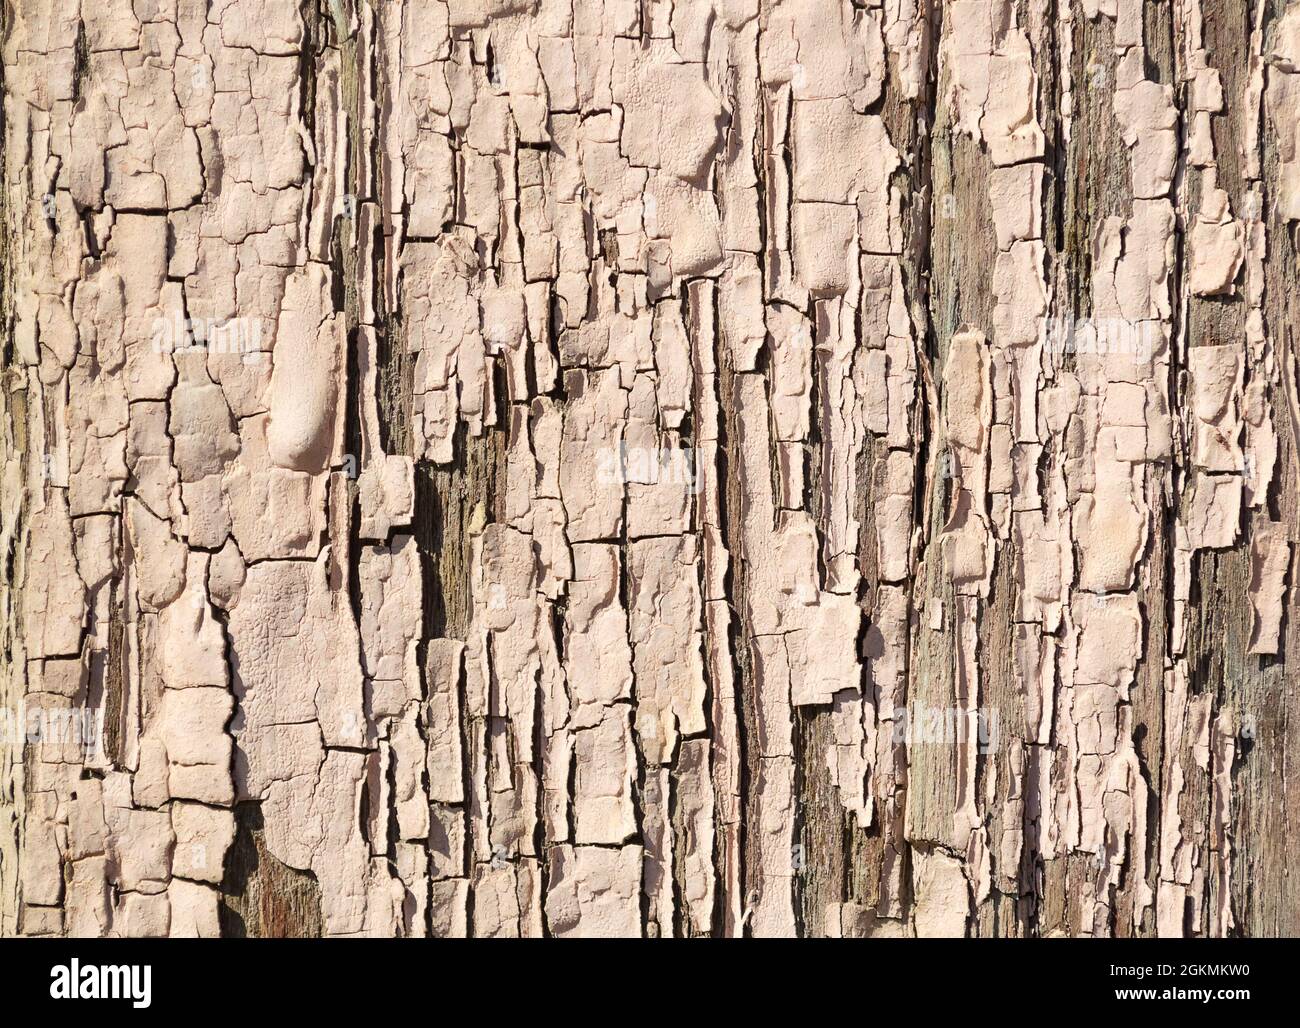 Old wooden texture with peeling brown paint. Background of old painted wood fragment Stock Photo